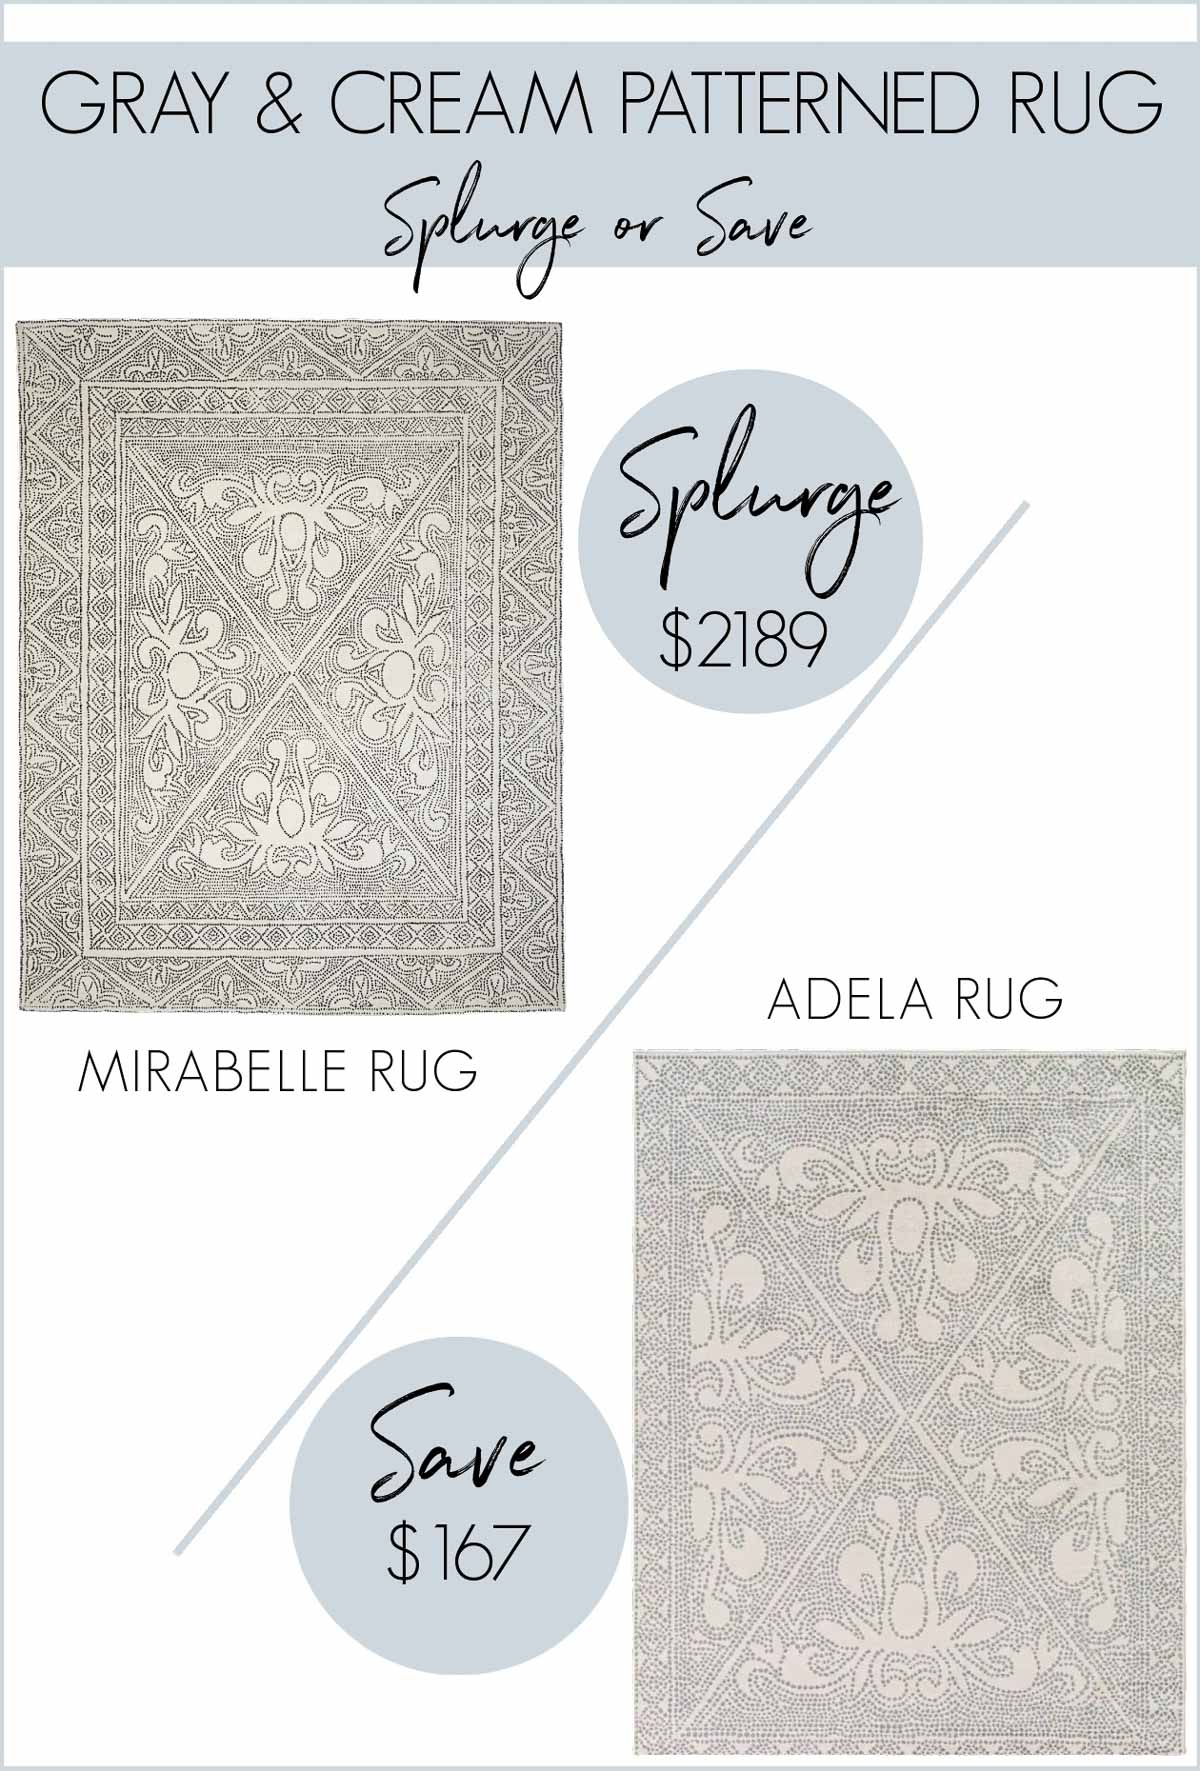 Neutral area rug look for less - a favorite cheap home decor find!